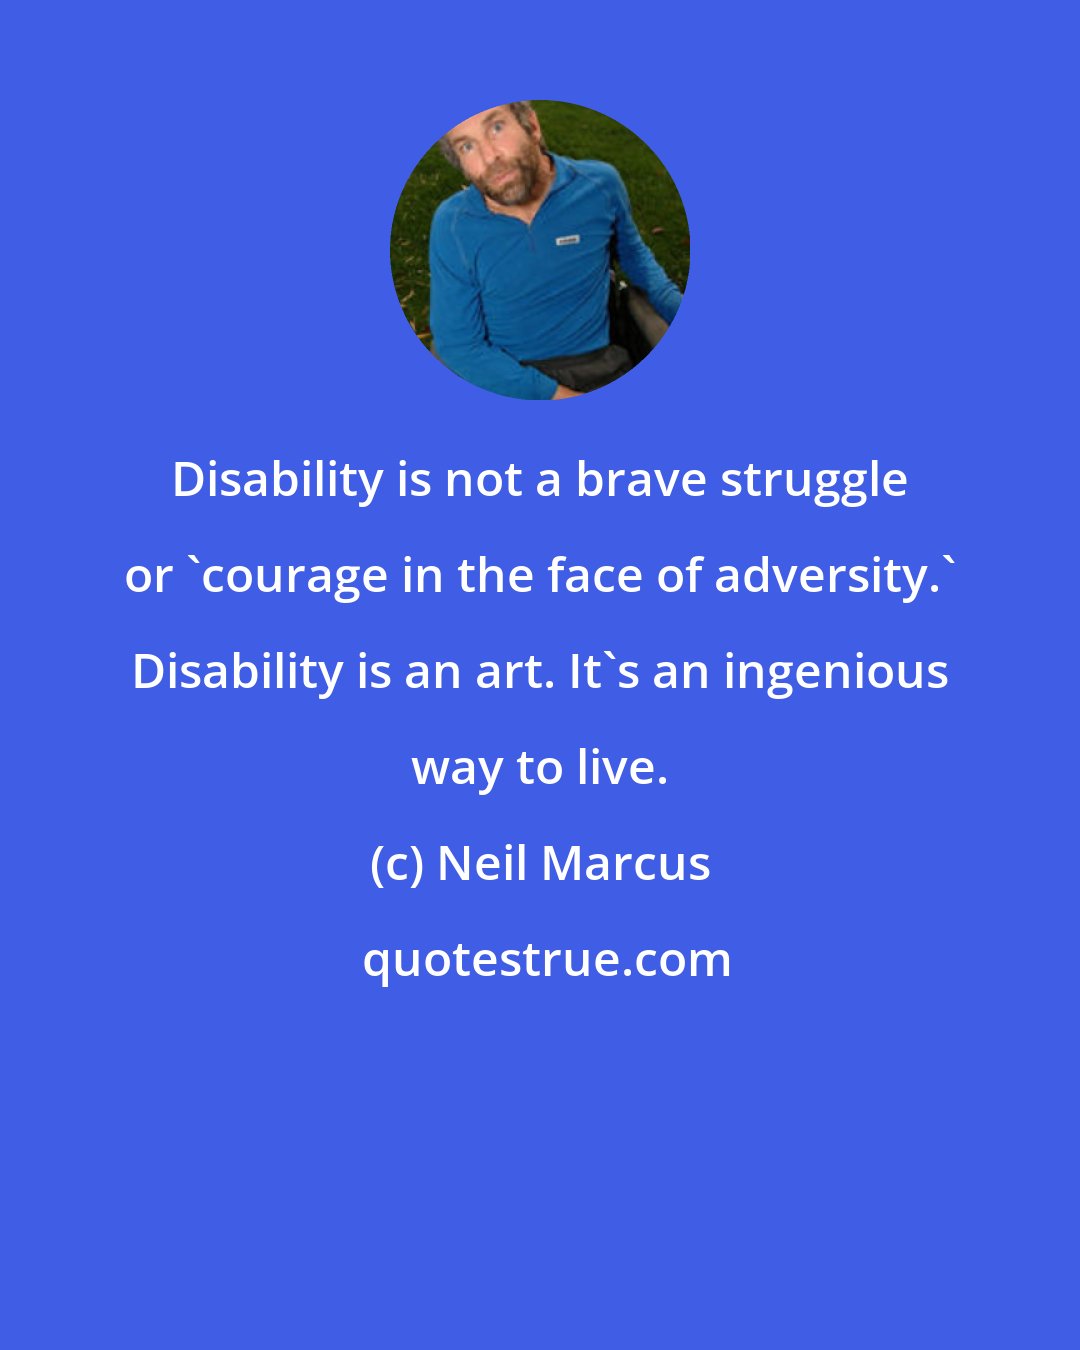 Neil Marcus: Disability is not a brave struggle or 'courage in the face of adversity.' Disability is an art. It's an ingenious way to live.